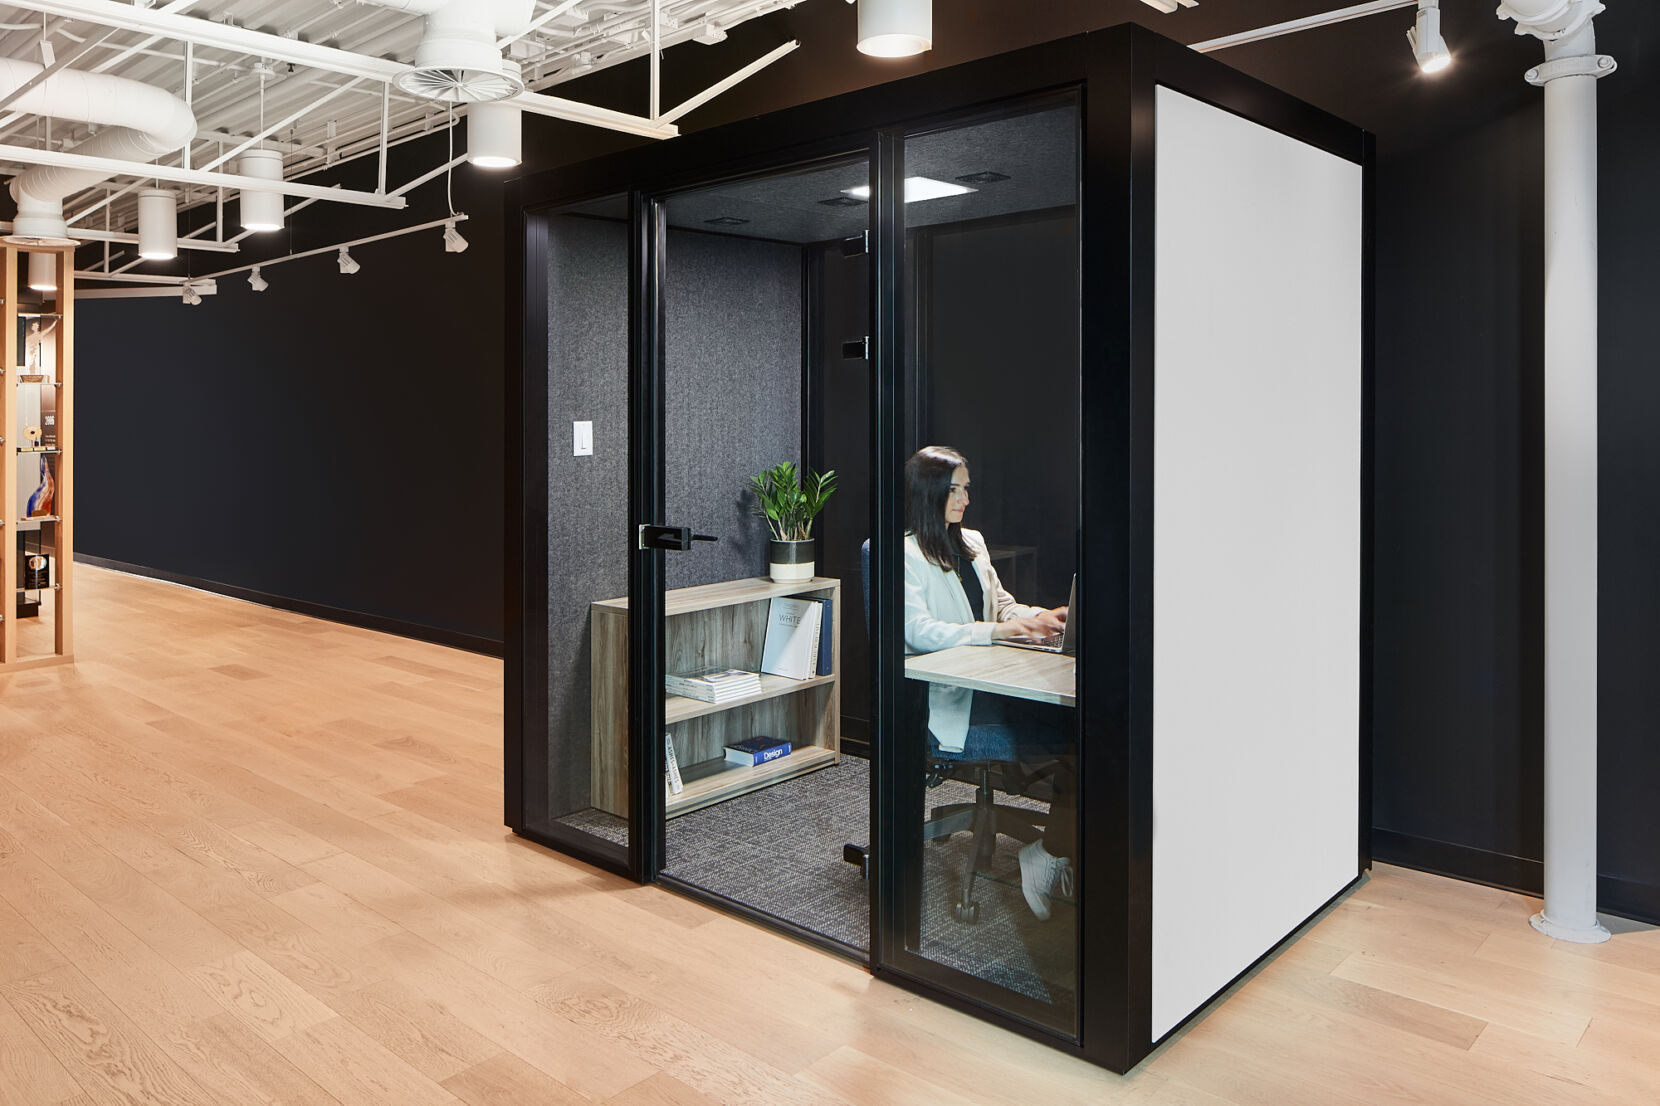 4 collections to keep in mind for the design of today’s office spaces